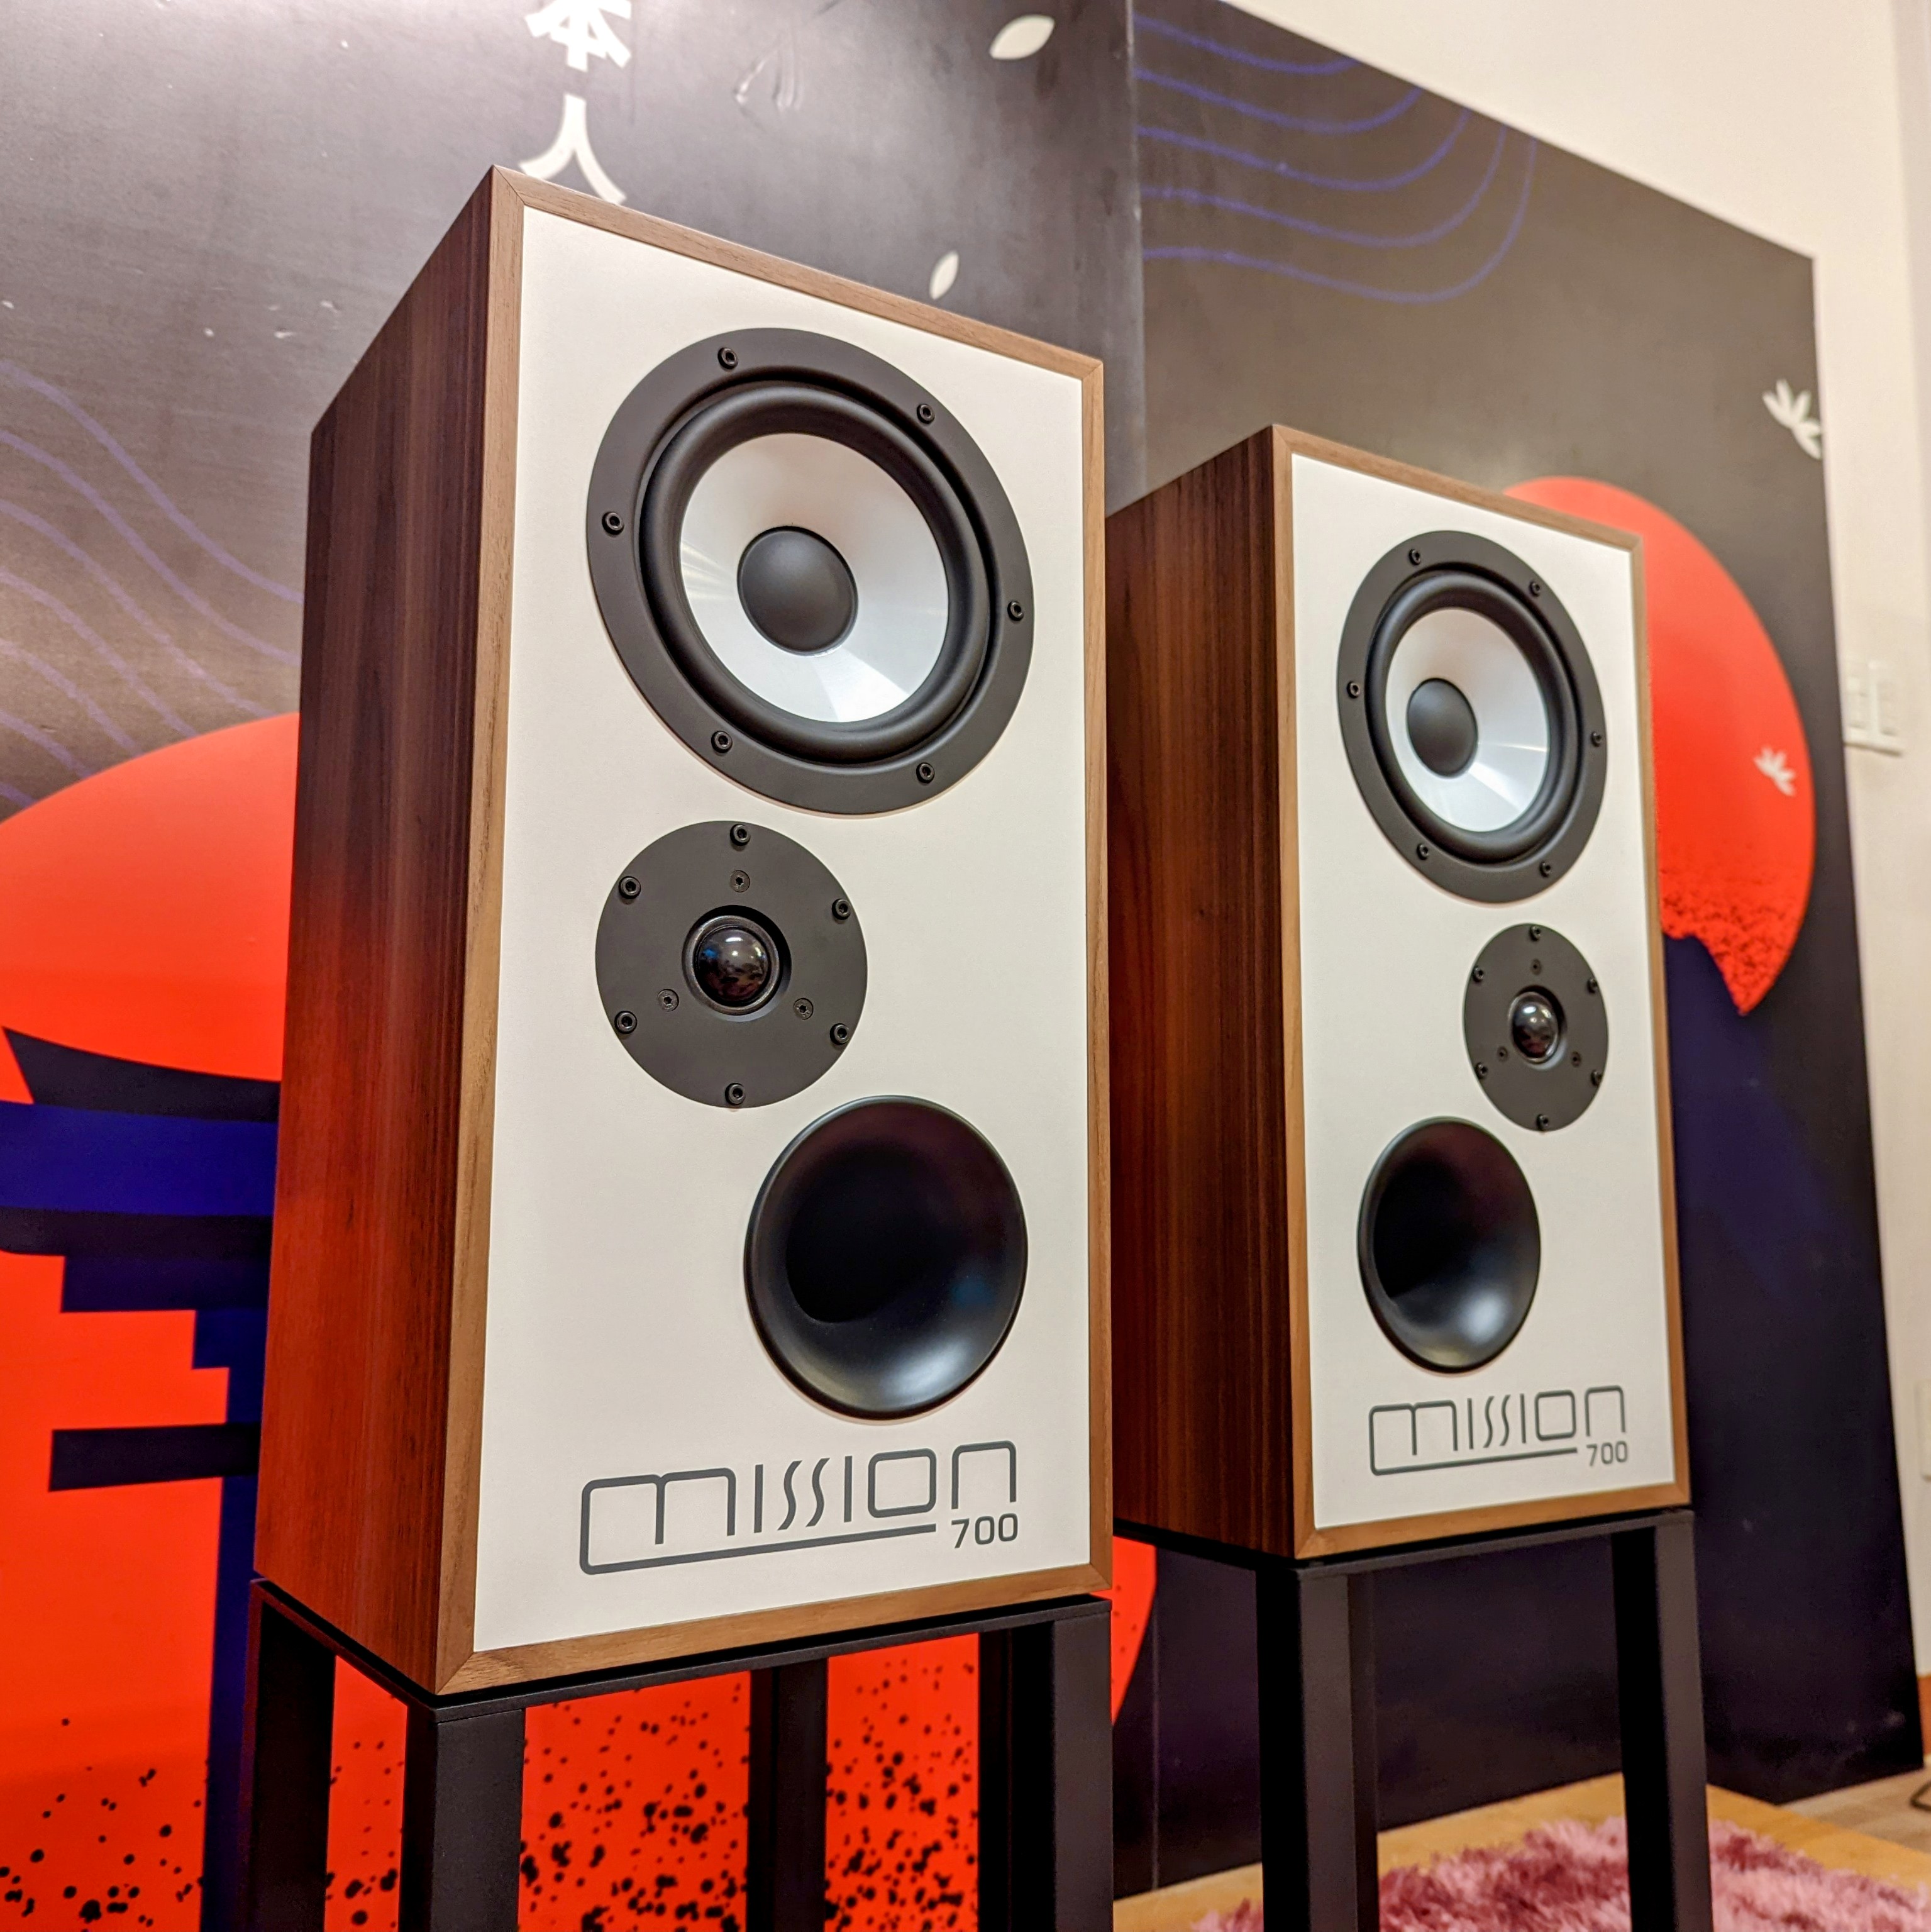 Mission 700 review: appealing, retro-inspired speakers | What Hi-Fi?